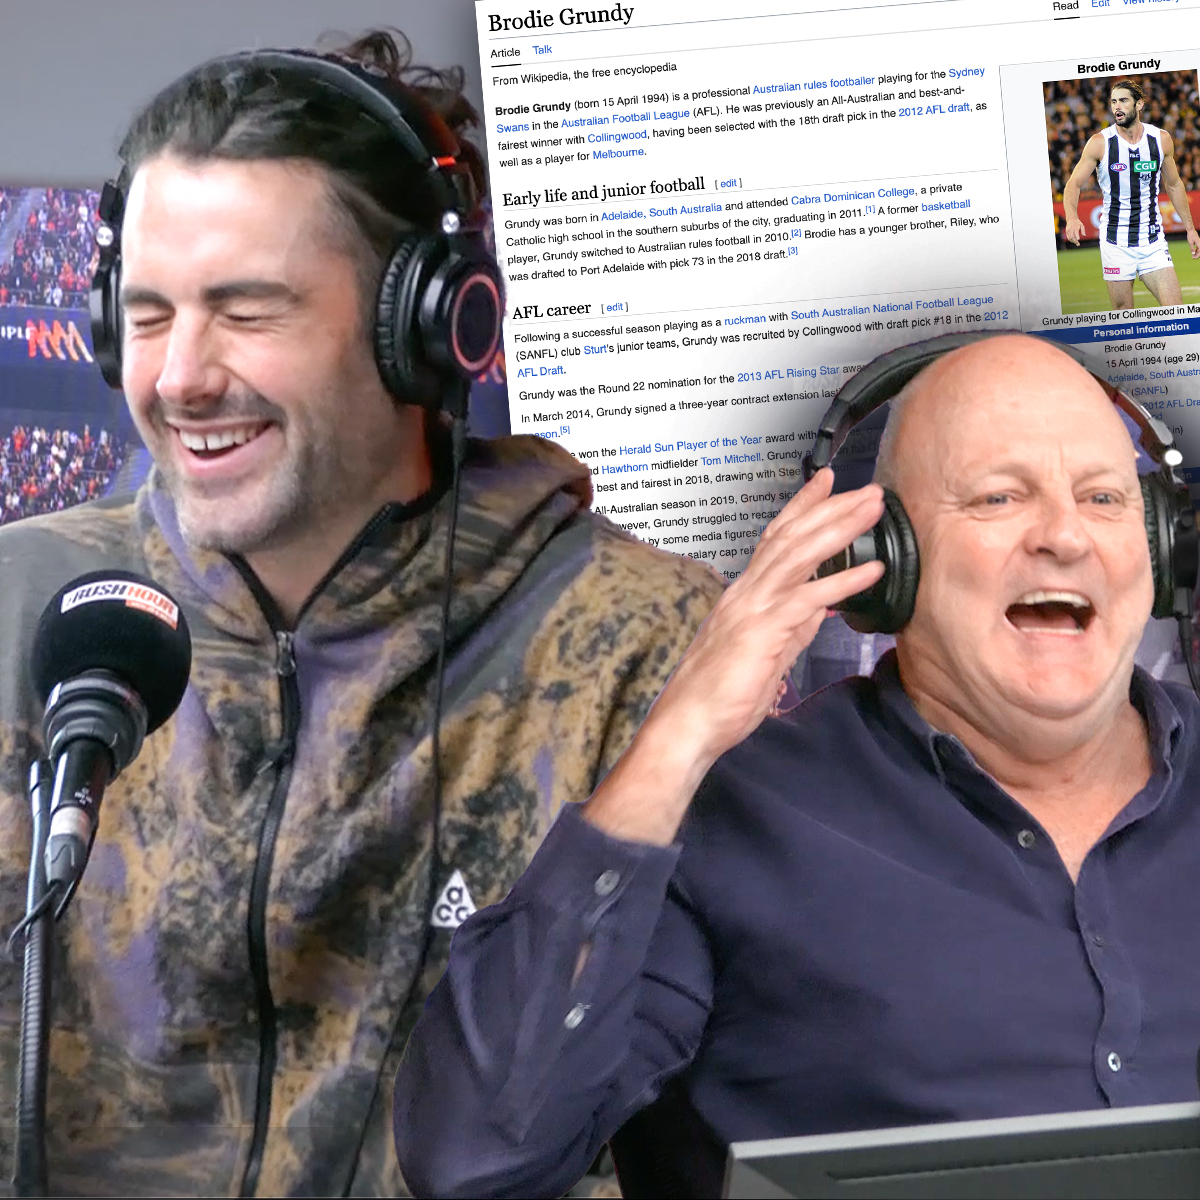 Billy Brownless grills Brodie Grundy about rumours on his Wikipedia page